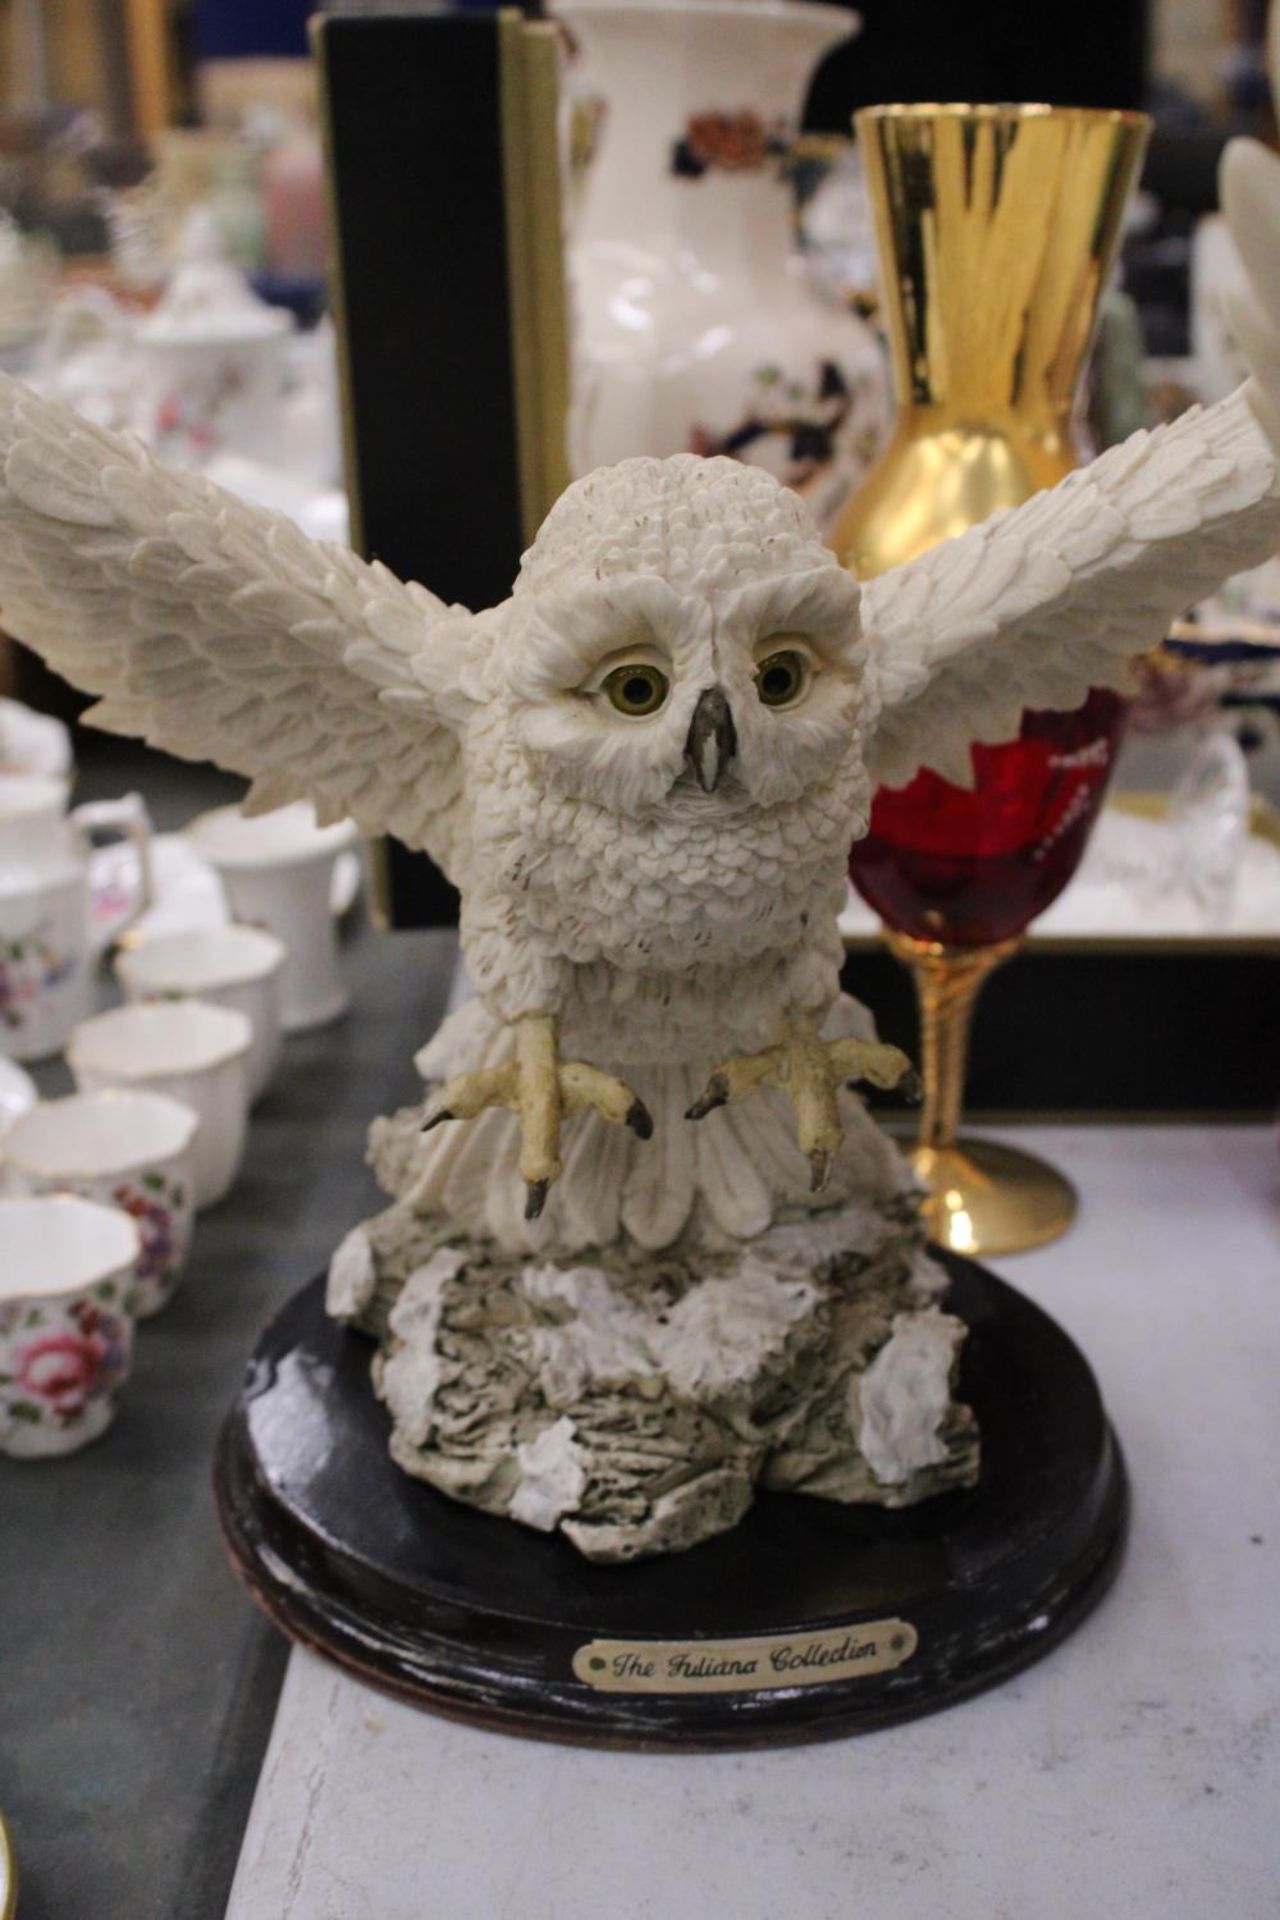 THREE LARGE RESIN 'JULIANA' MODELS OF OWLS TO INCLUDE A CLOCK - Image 4 of 5